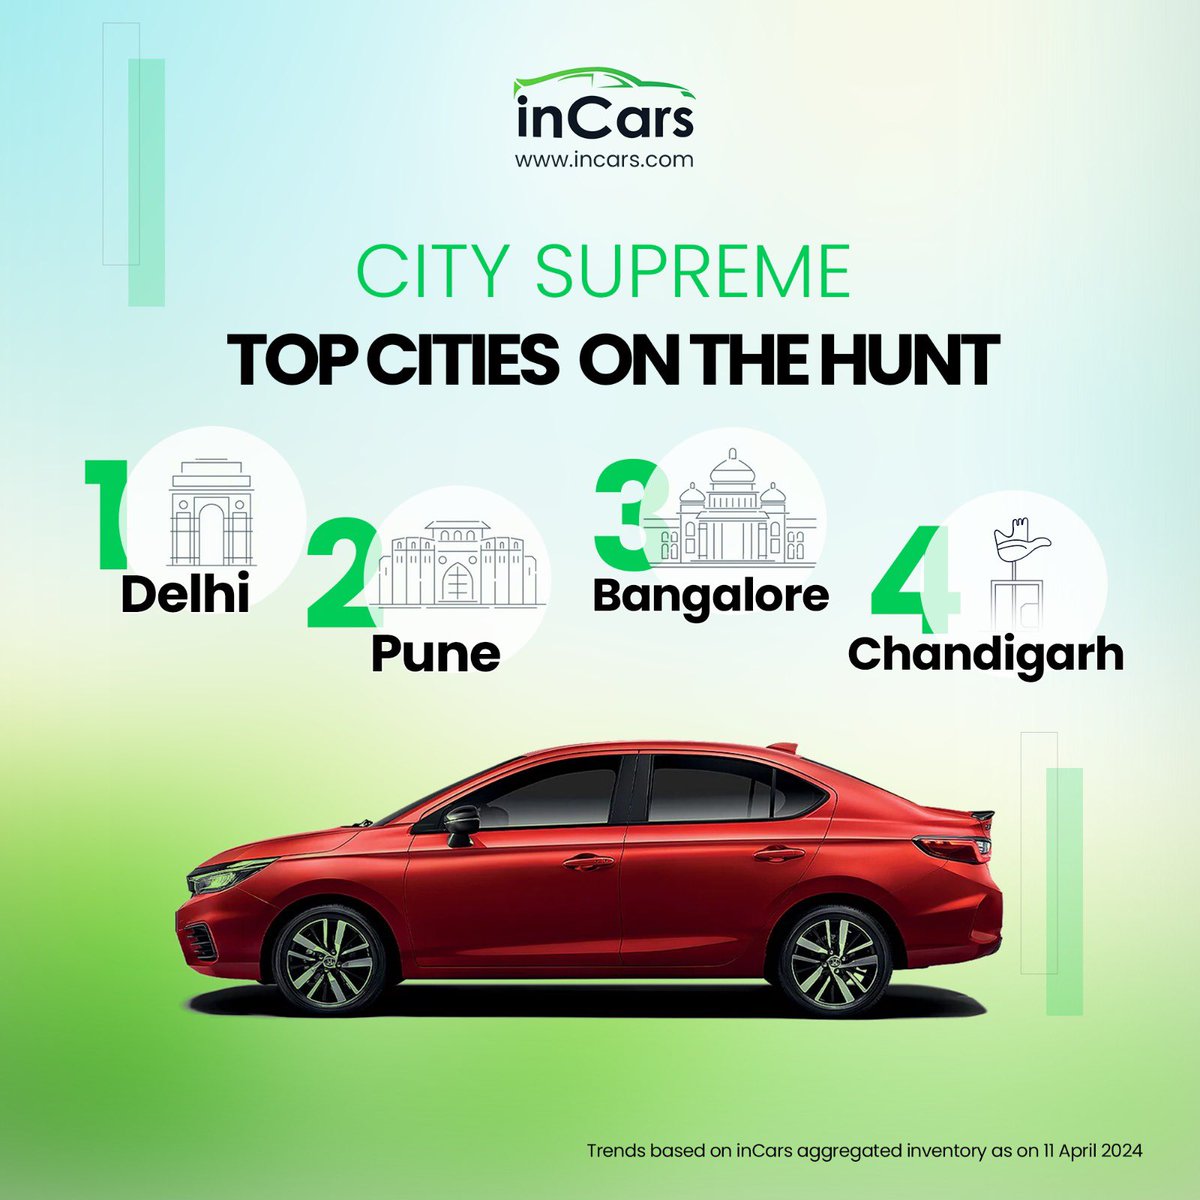 Today “Daily Wheels” dives into India's top cities revving up for Used Cars! 🚗 Buckle up and stay tuned for all about used cars! #inCars #inCarsAI #UsedCars #UsedCarSearch #UsedCarsMarket #SecondHandCars #UsedCarInfo #DailyWheels #TopCities 🌆